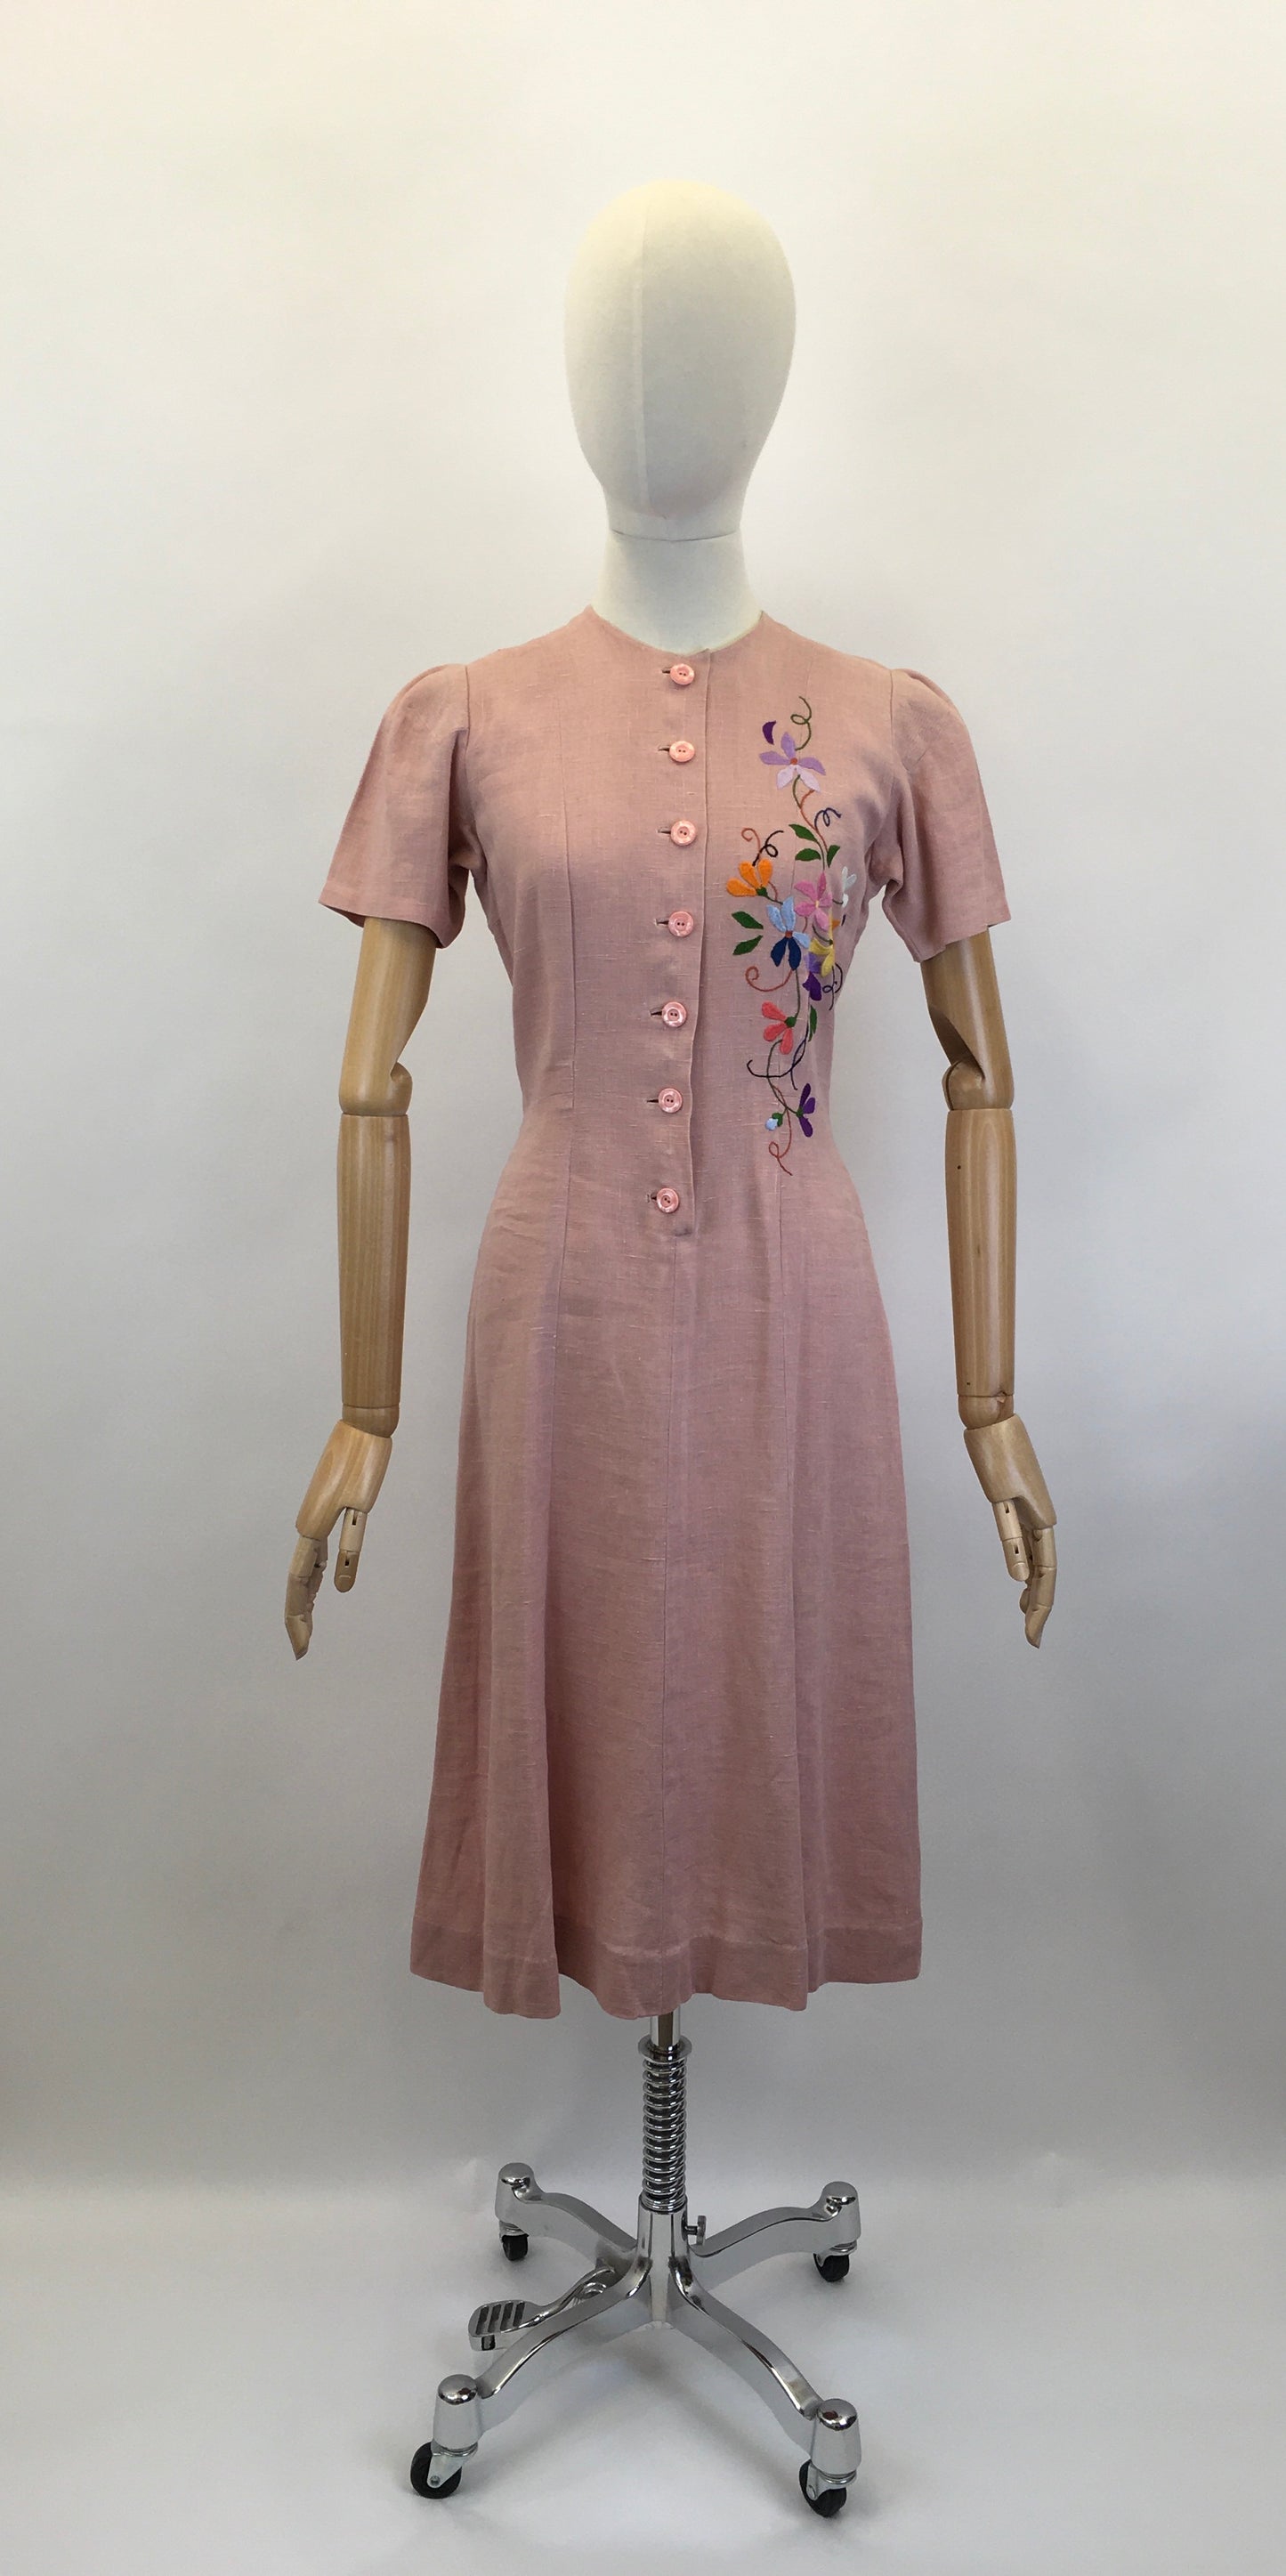 Original Early 1940’s Moygoshal Linen Dress with Embroidery - In Powdered Rose with Spring Meadow Florals